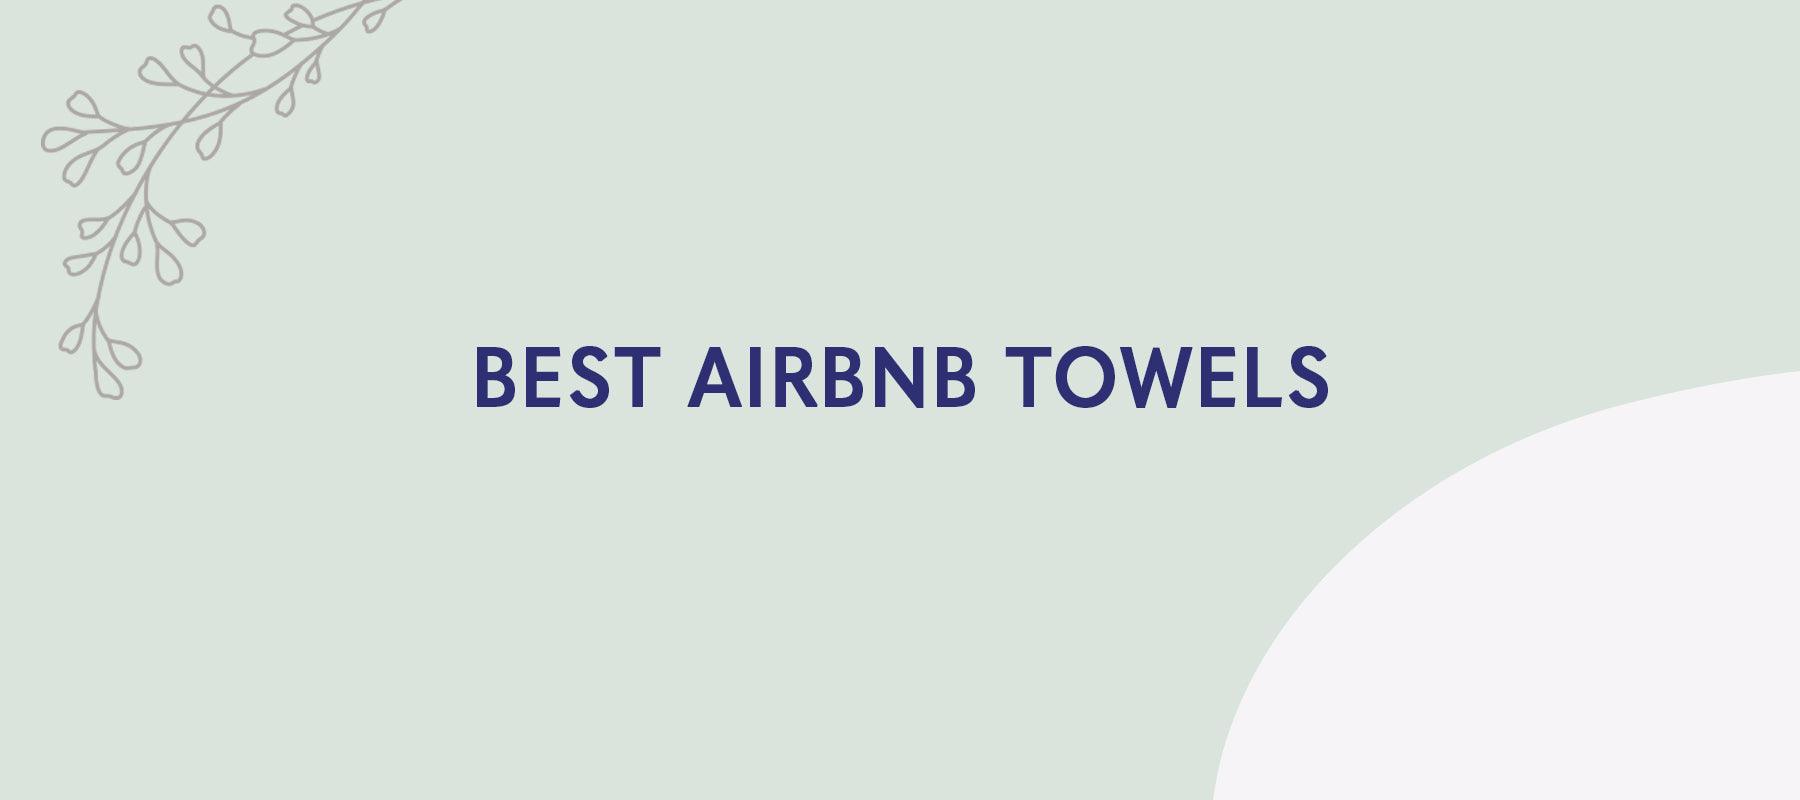 Best Airbnb Towels - American Soft Linen